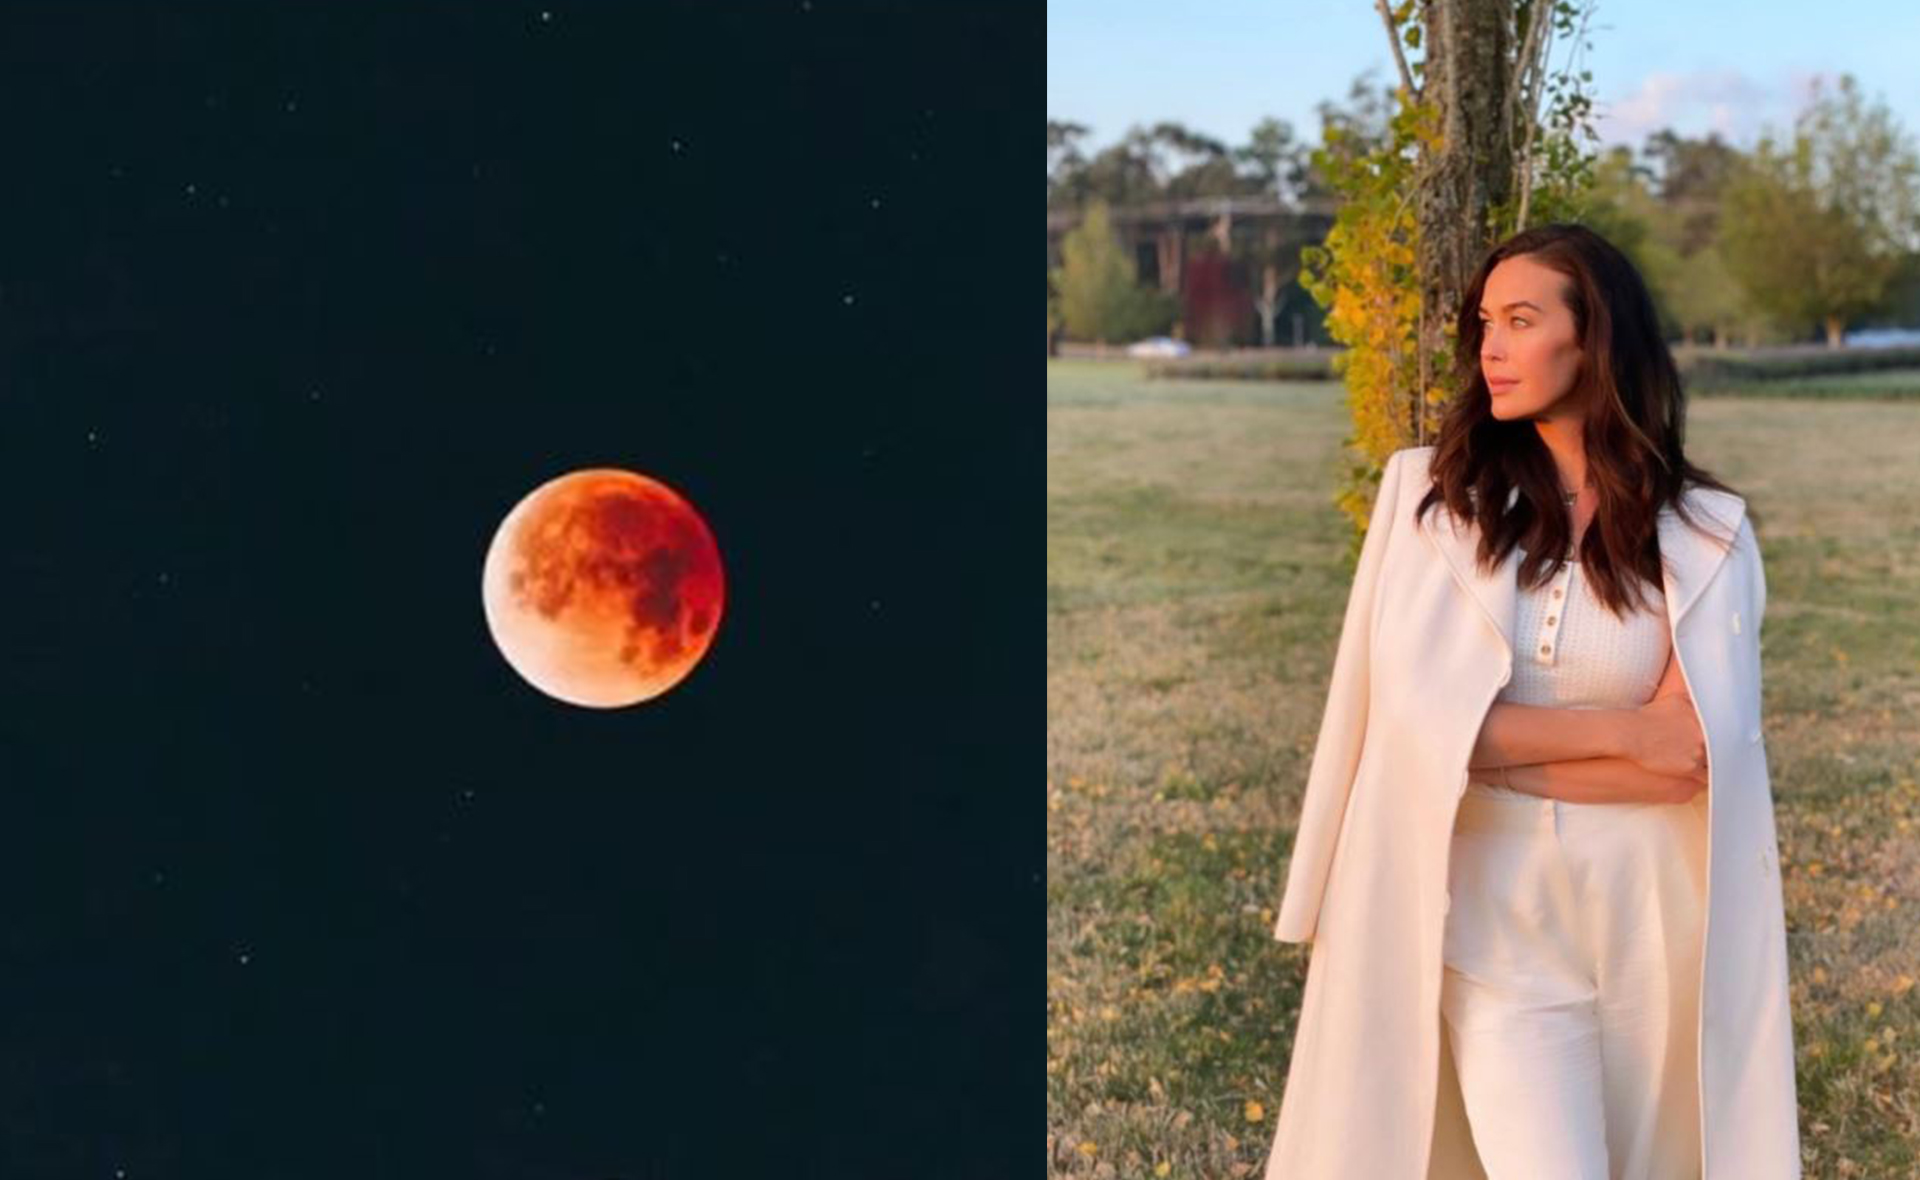 These awestruck Aussie celebs’ hearts were totally eclipsed during last night’s lunar phenomenon